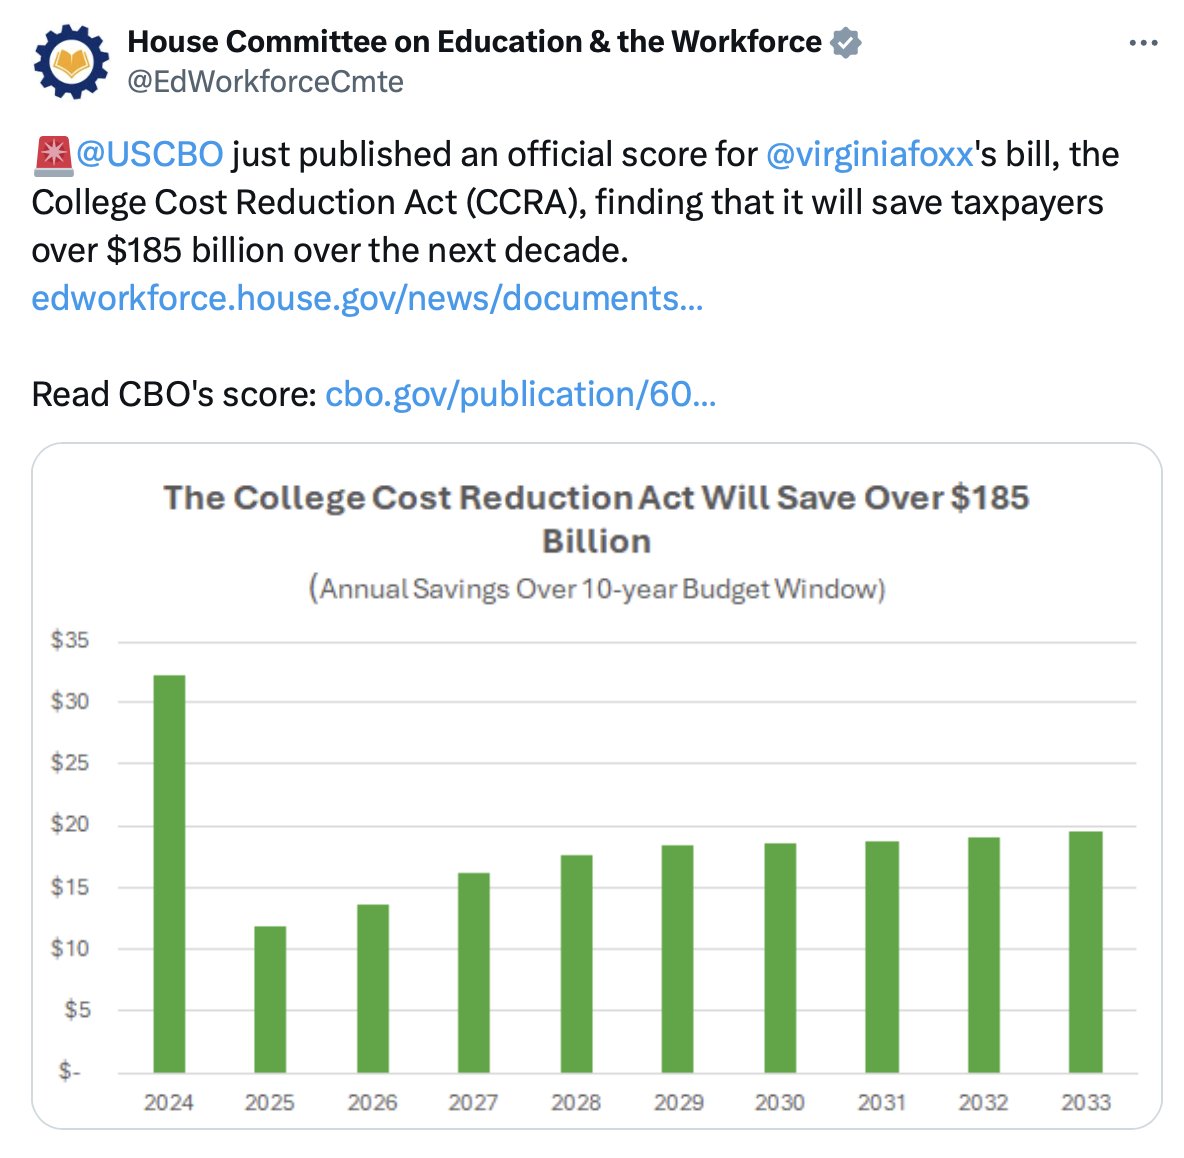 Here is the part they aren't telling you...Republicans' so-called 'plan' to reduce the cost of college would cut *153.6 BILLION DOLLARS* from federal student aid. @GOP's idea on how to make college 'more affordable' is by making it so low-income students can't afford to attend.